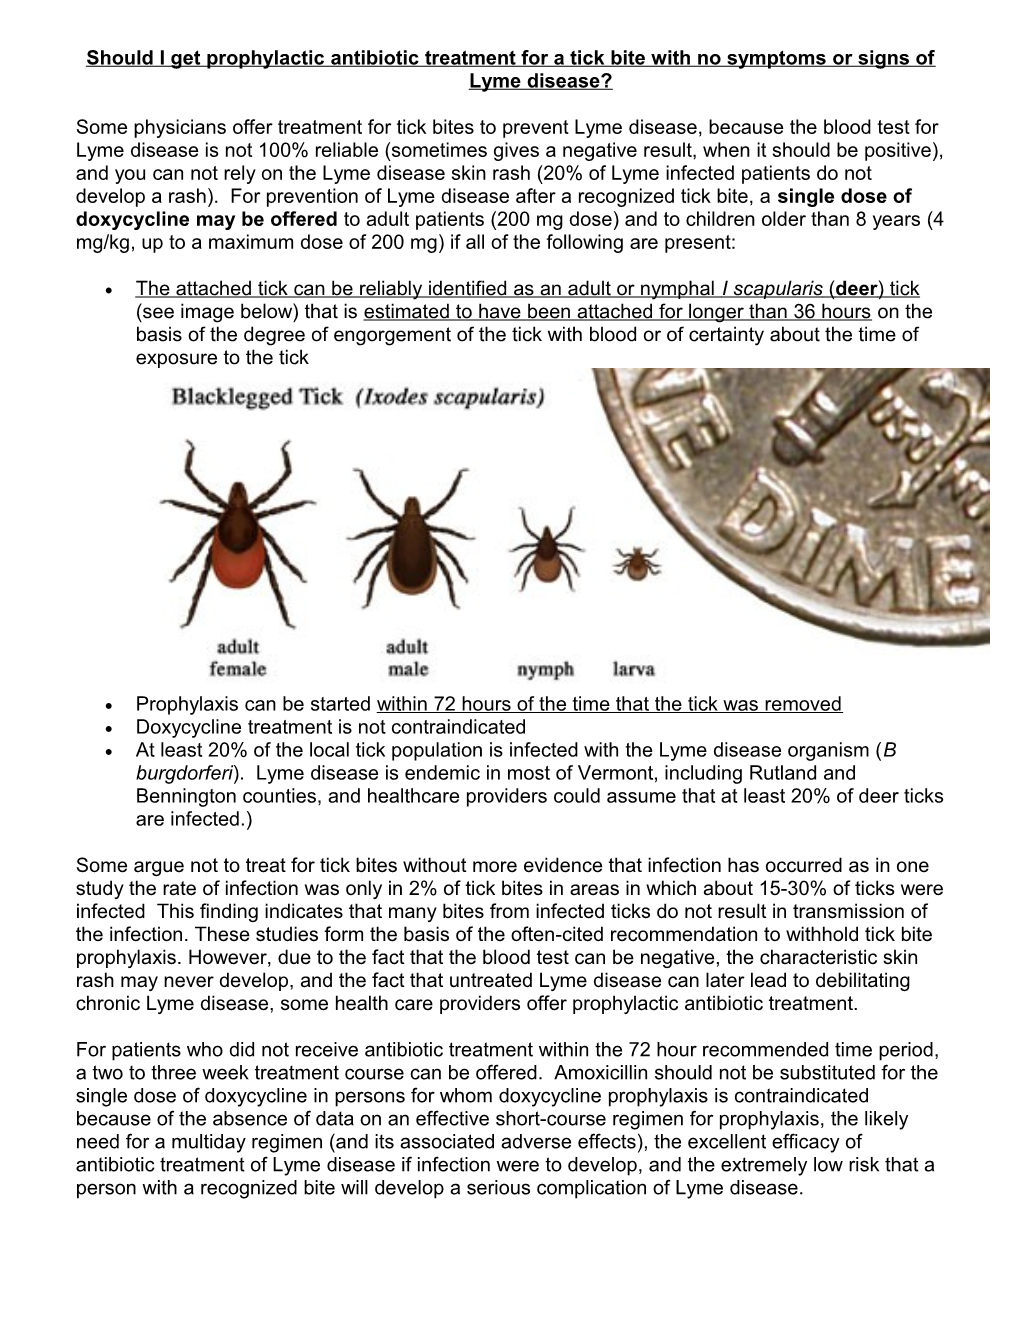 Should I Get Prophylactic Antibiotic Treatment for a Tick Bite with No Symptoms Or Signs